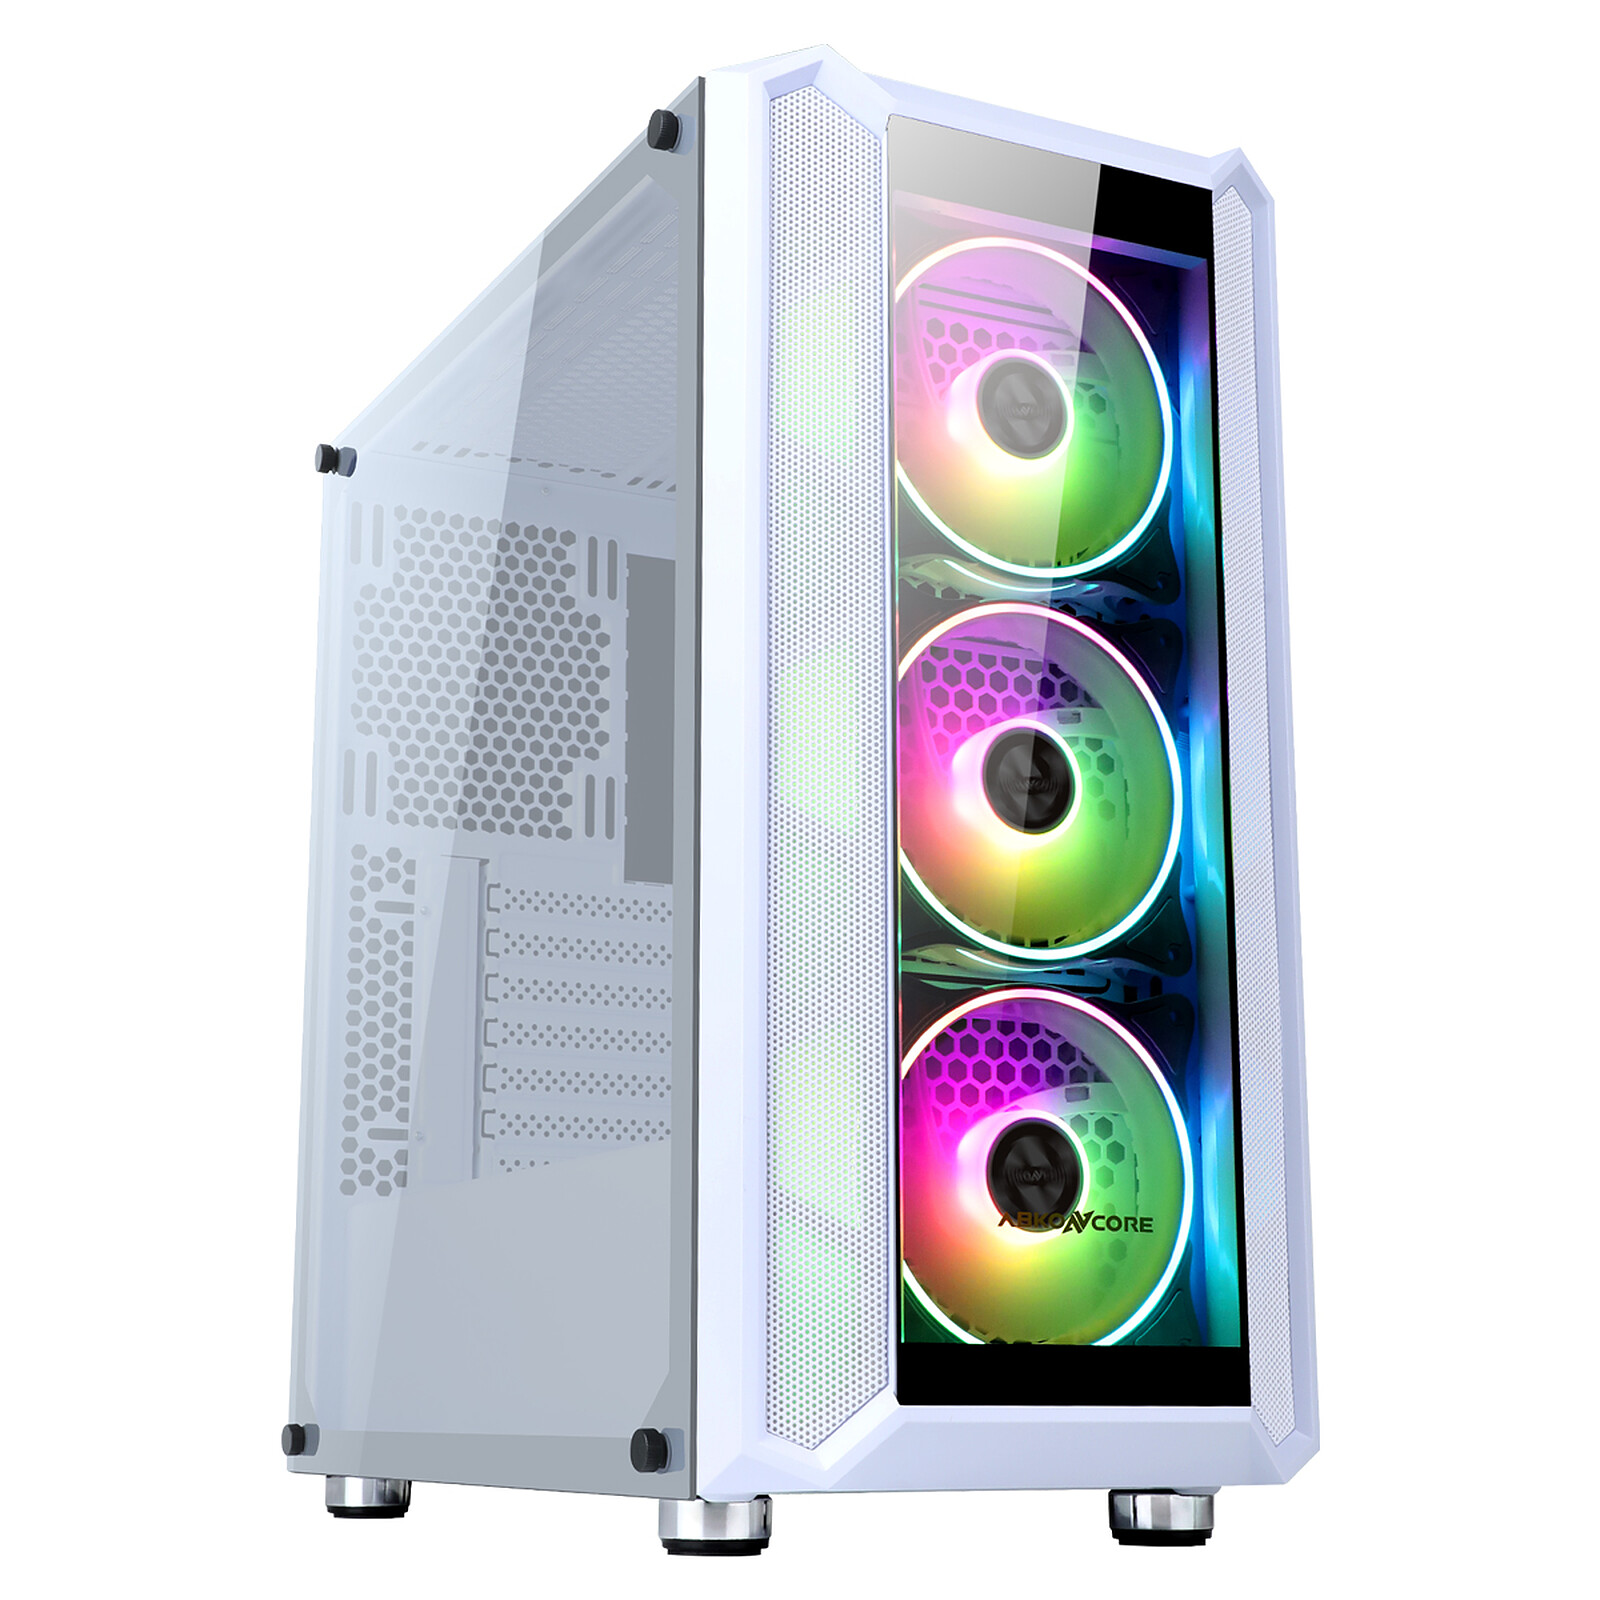 Abkoncore H301G - White - PC cases - LDLC 3-year warranty